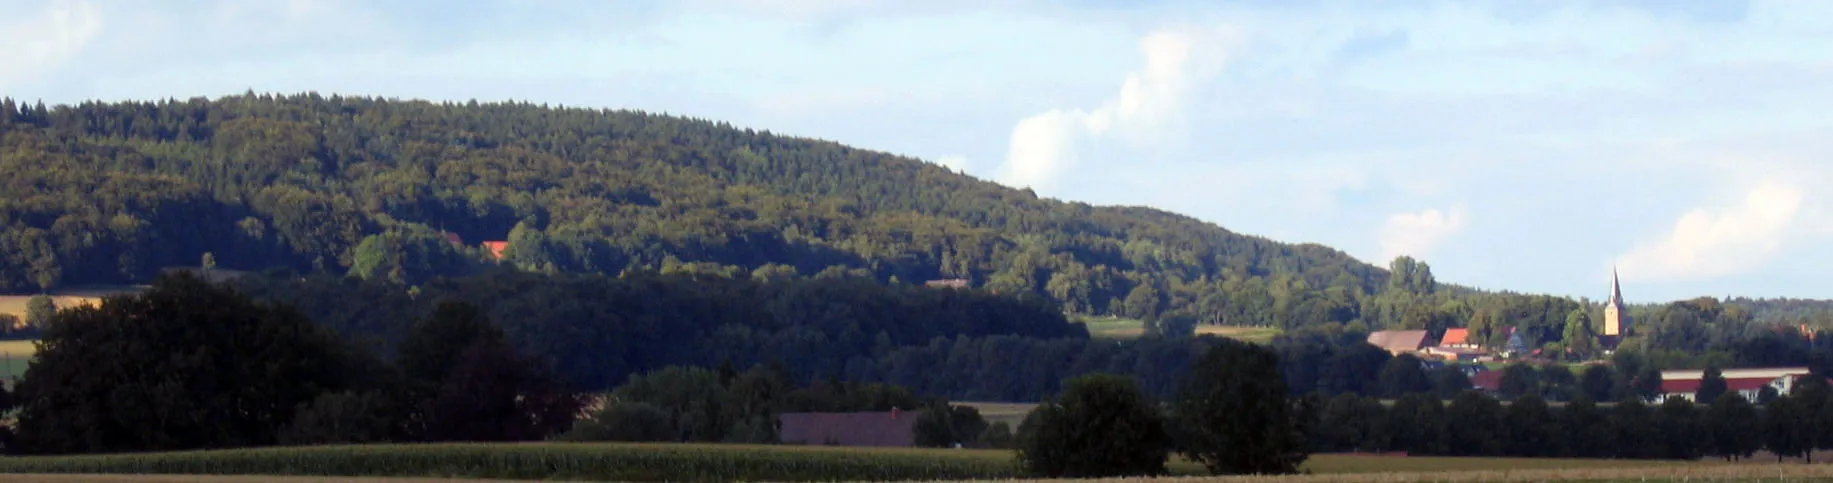 Photo showing: View from Melle-Buer towards the town of Rödinghausen-Westkilver, Germany, situated at the southern slope of Wiehengebirge.